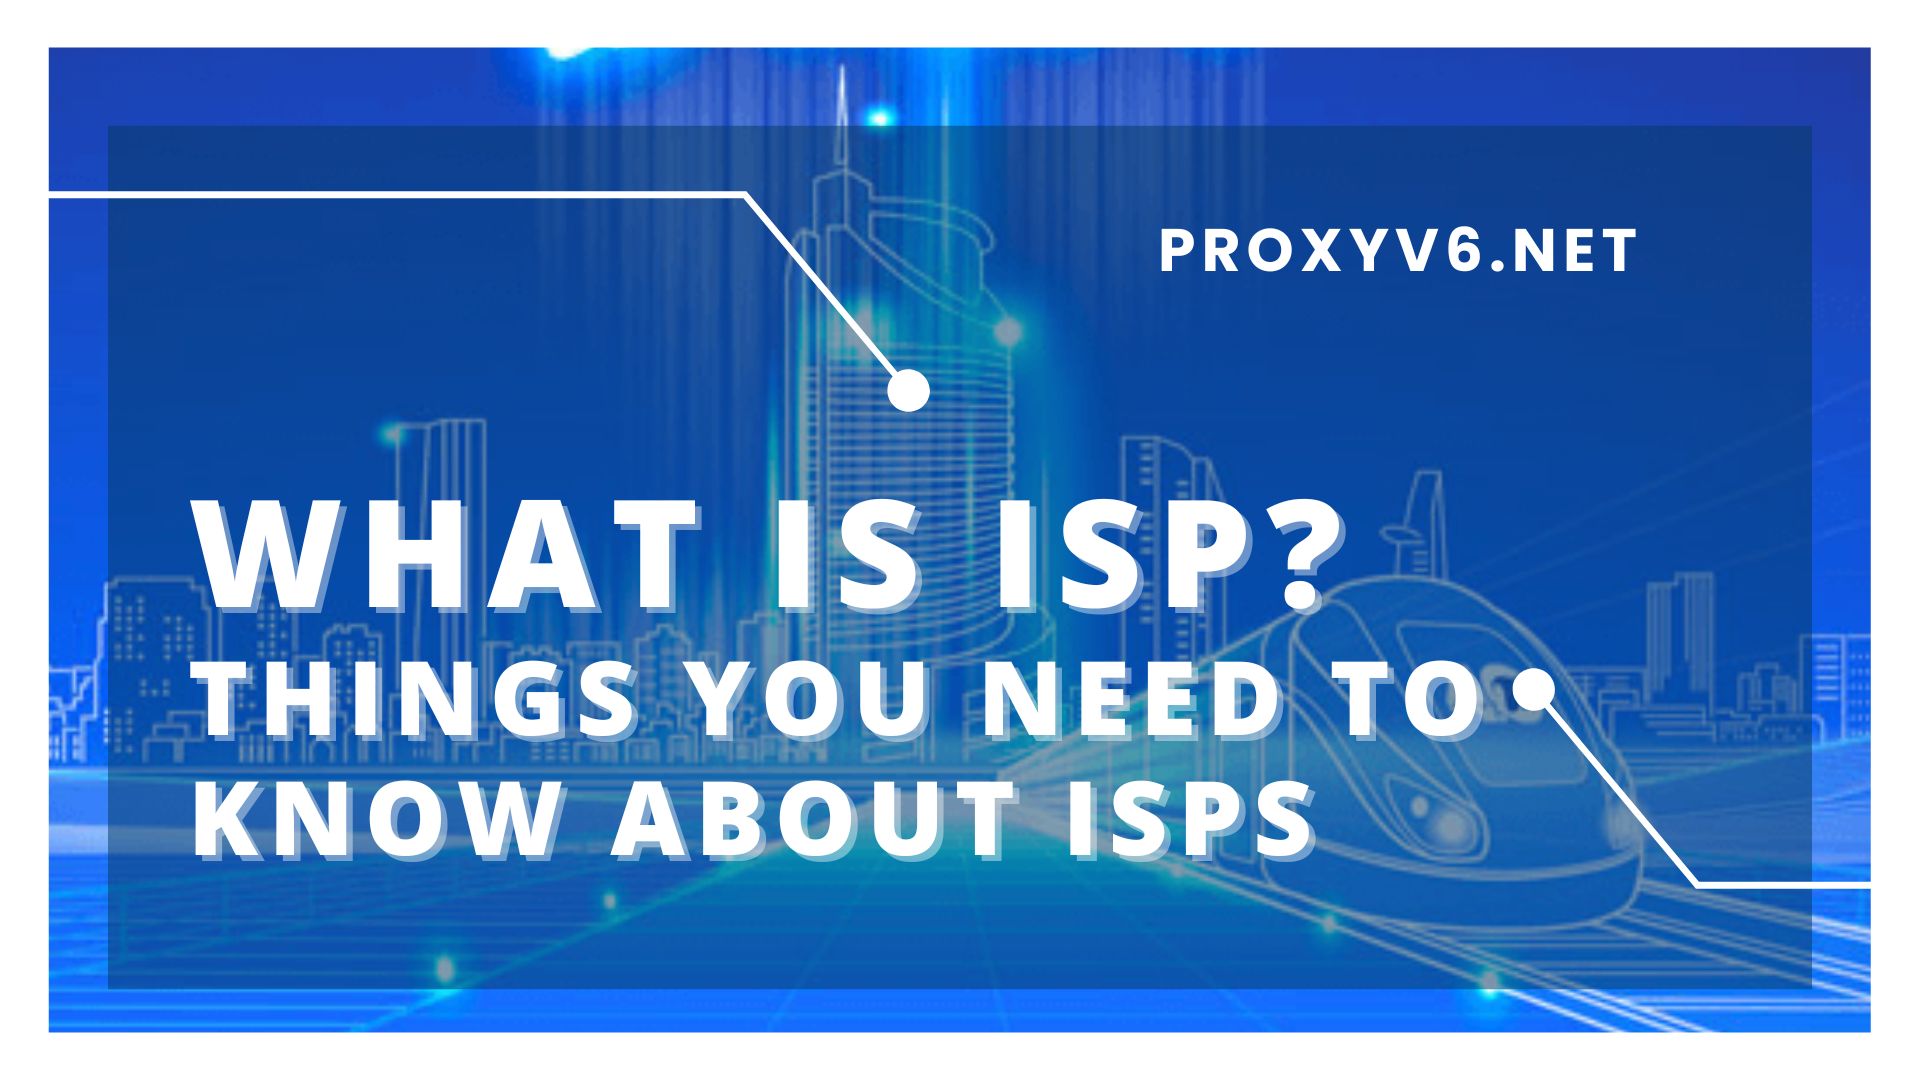 What is ISP? Things you need to know about ISPs